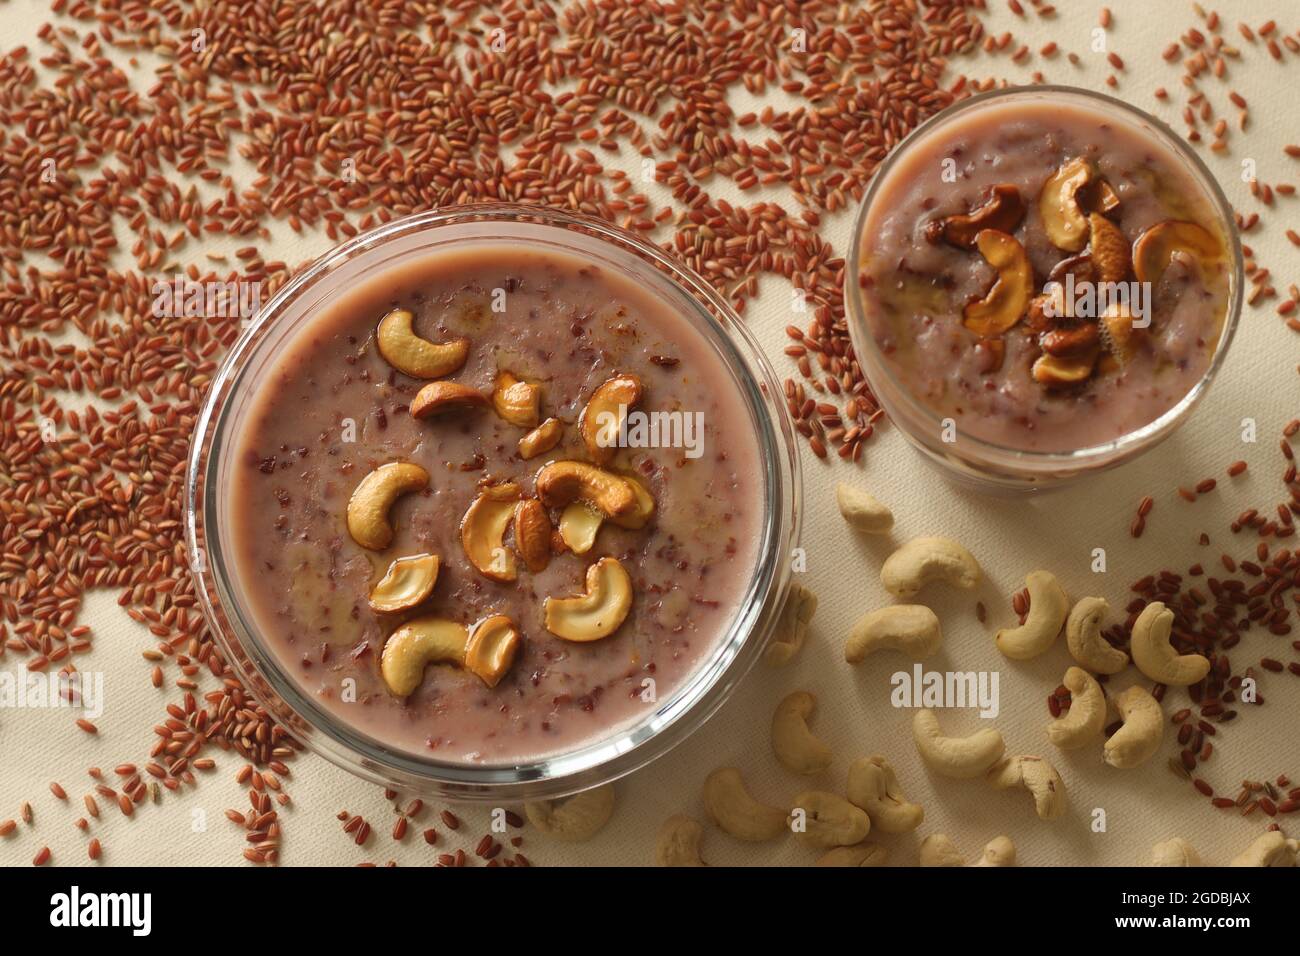 Red rice porridge with navra rice, milk and ghee. A healthy breakfast option. Shot on white background Stock Photo